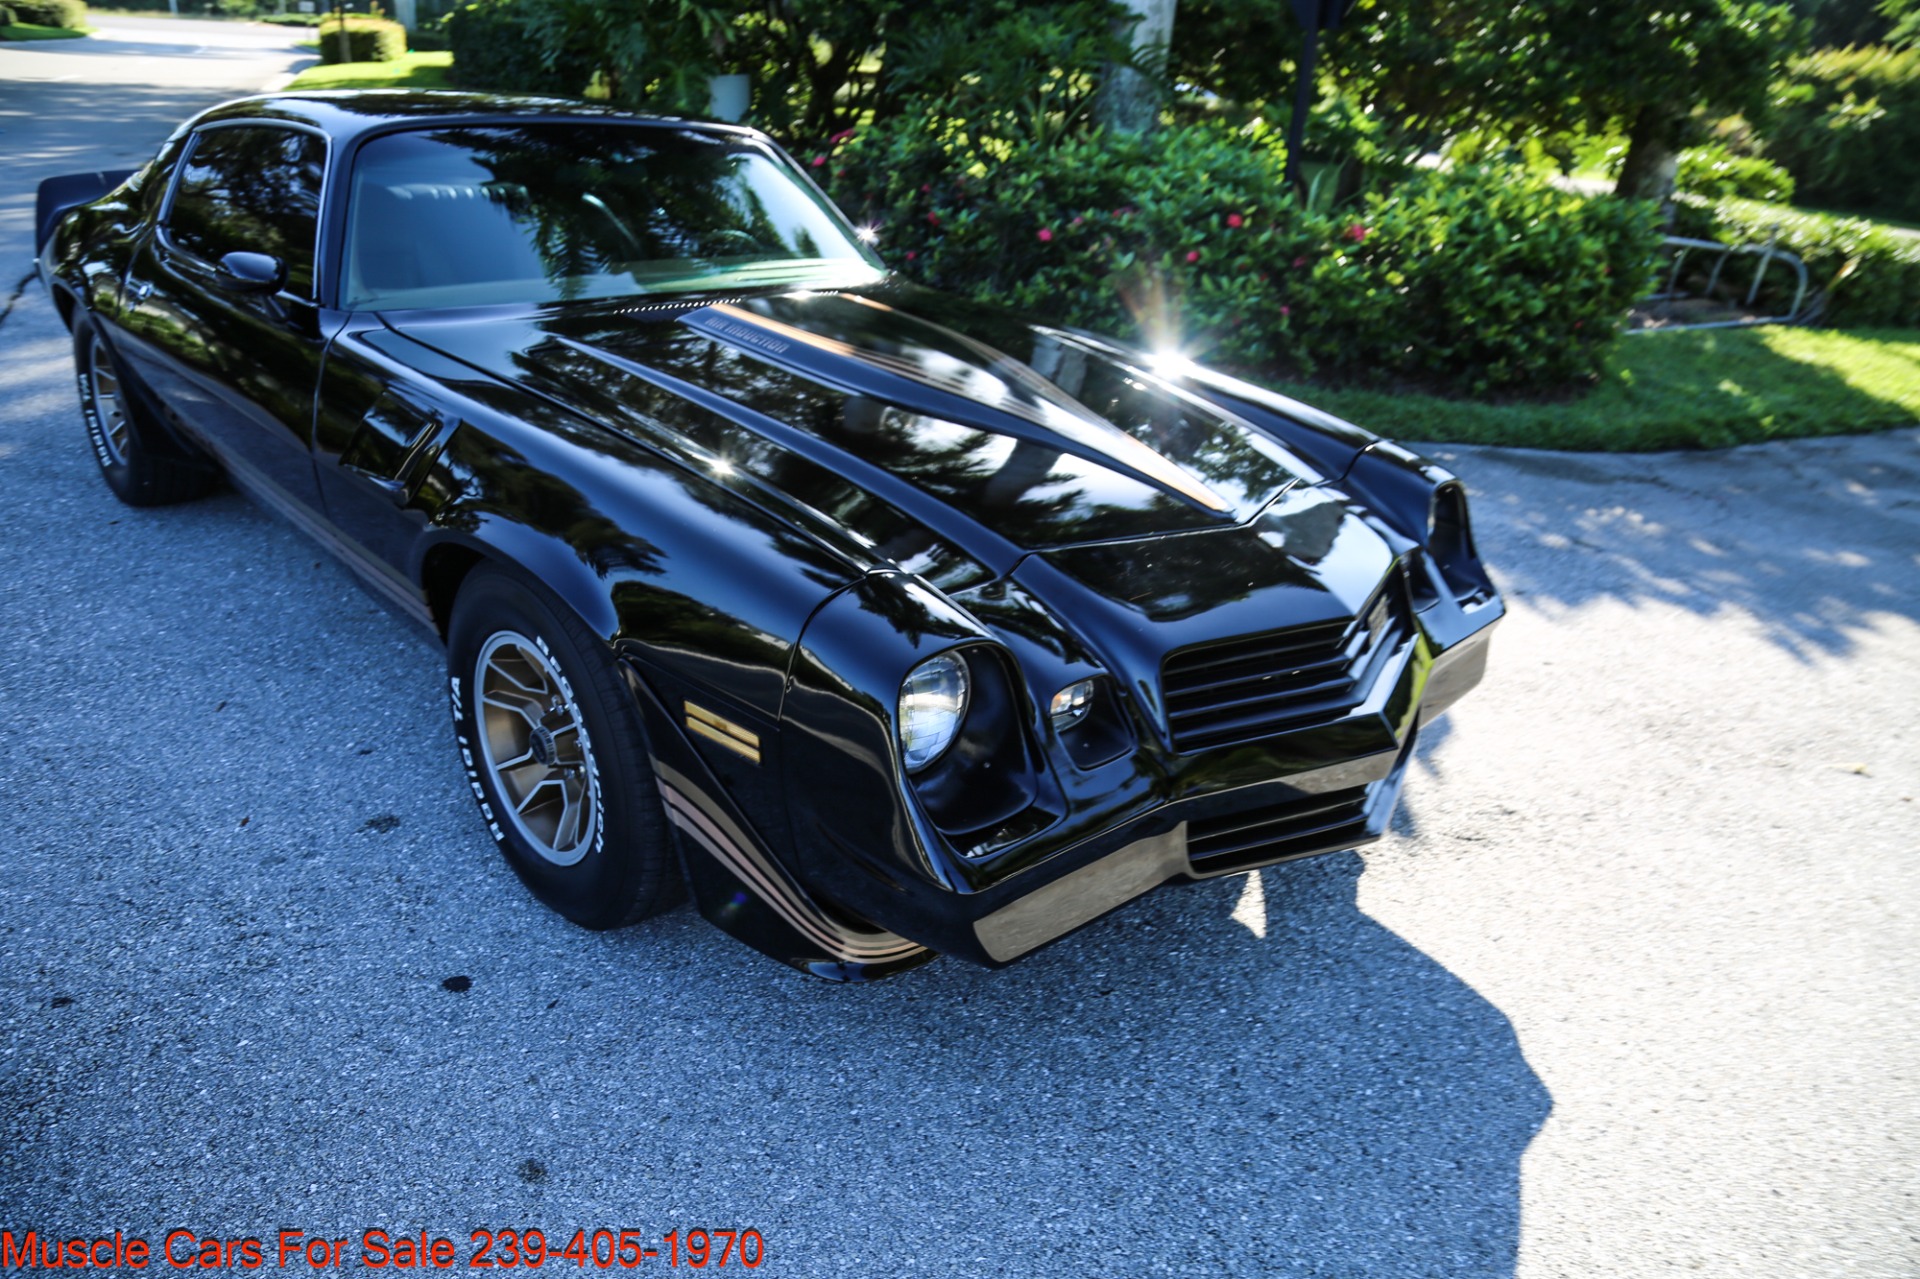 Used 1980 Chevrolet Camaro Z28 14454 Miles for sale Sold at Muscle Cars for Sale Inc. in Fort Myers FL 33912 3